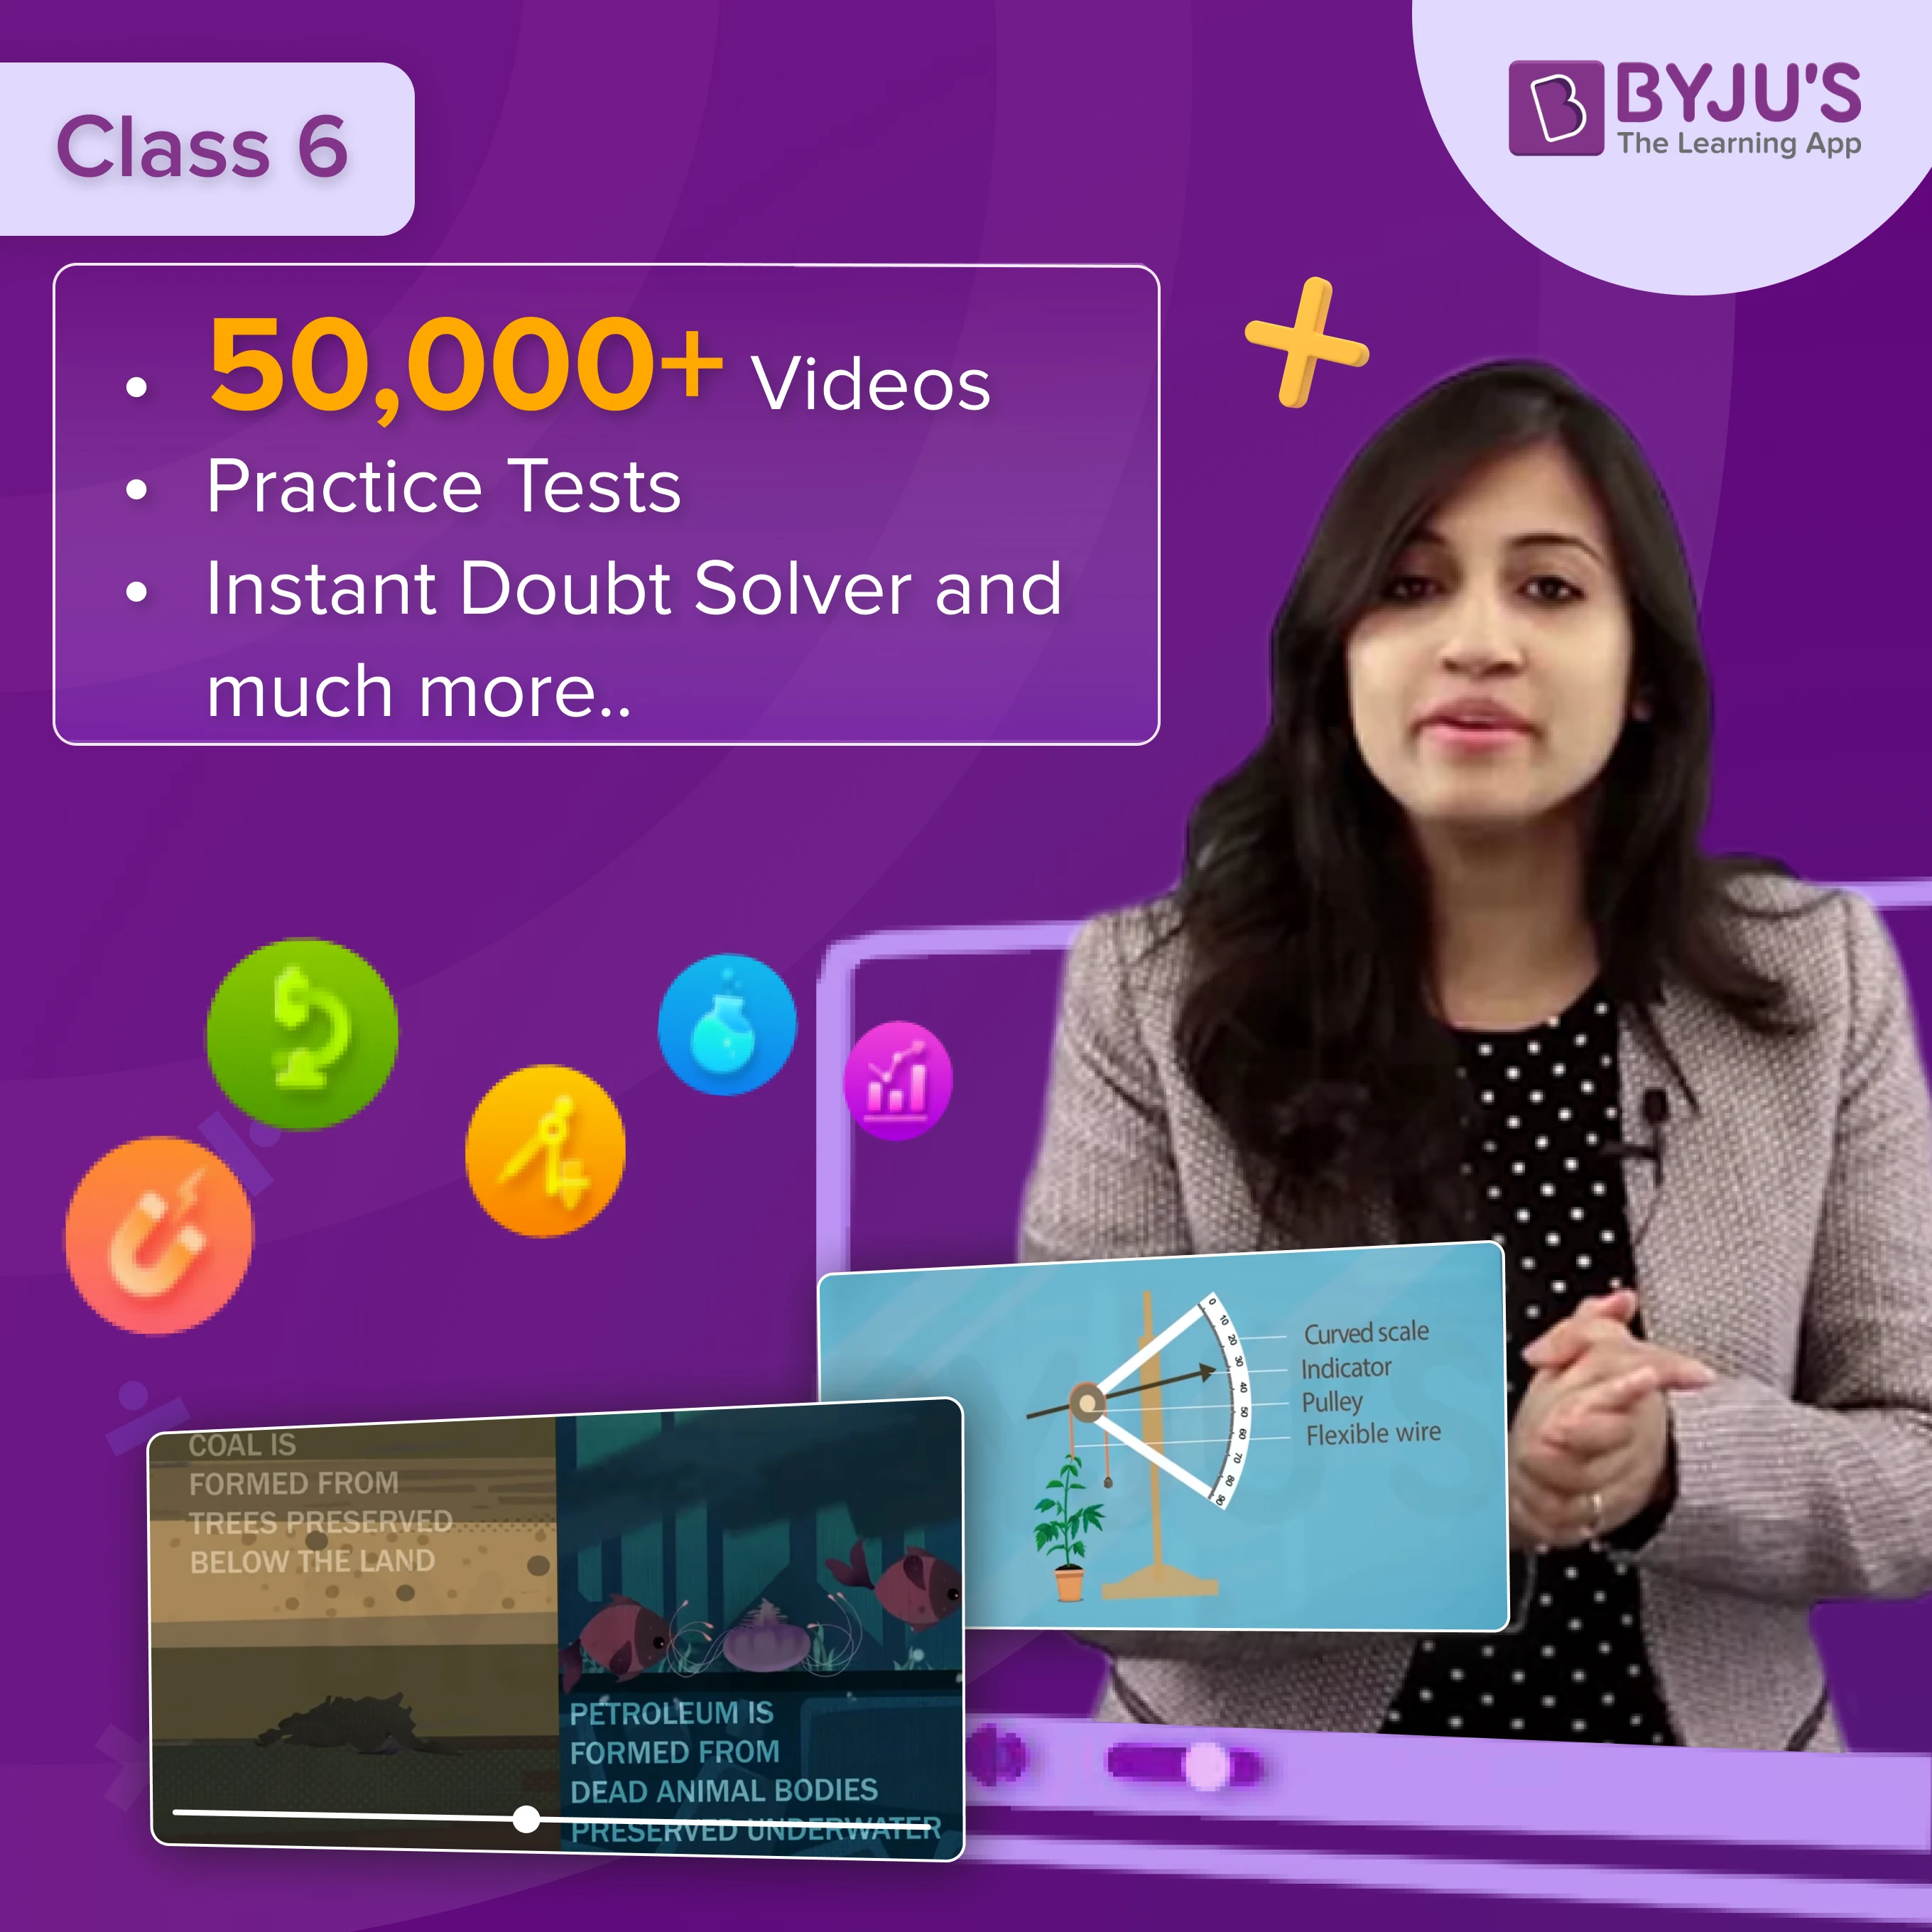 BYJU’S The Learning App - Class 6 (Renewal)